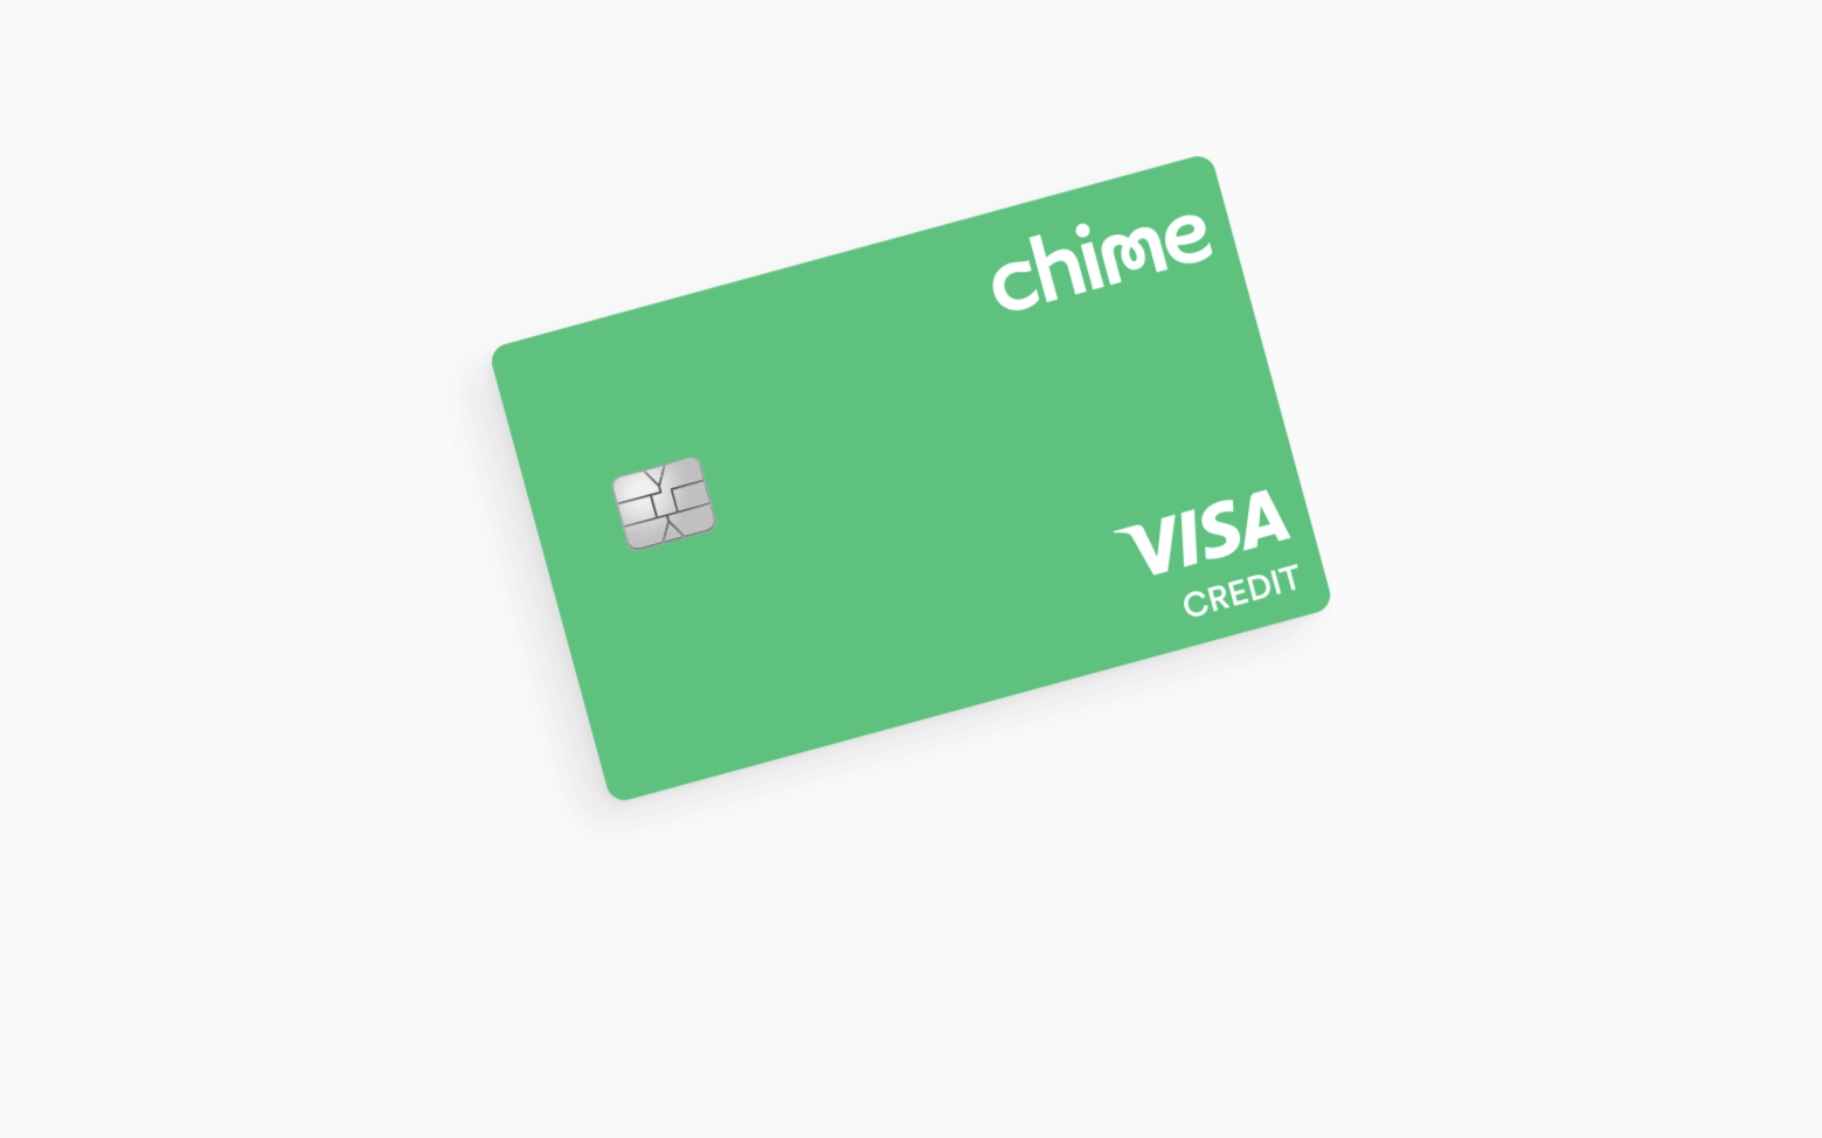 How To Load Money On Chime Card At Walmart